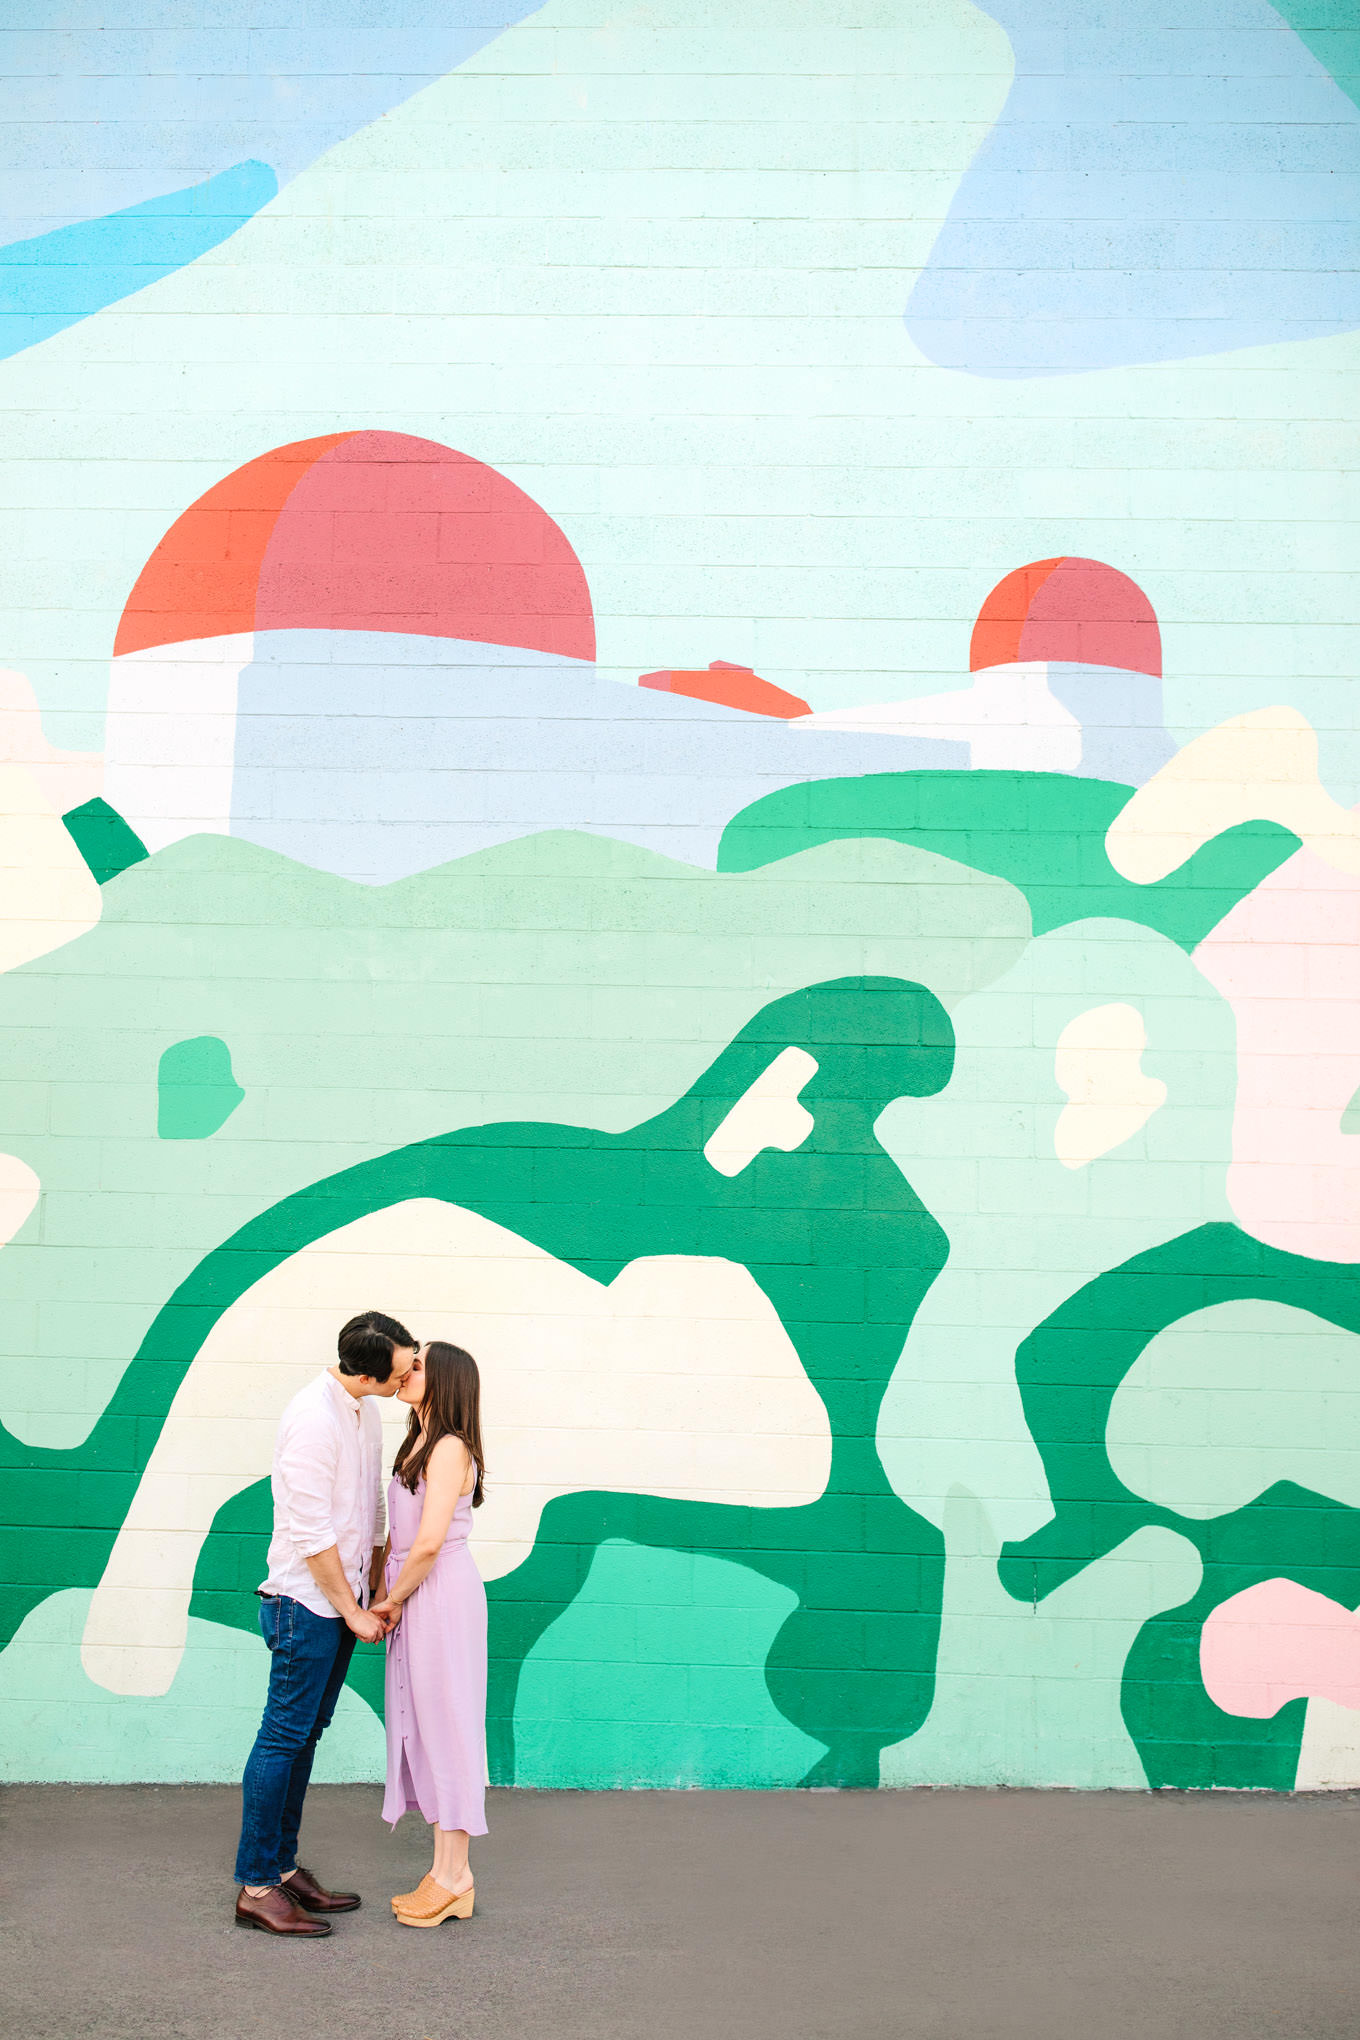 Griffith Park mural in Los Feliz engagement session | Engagement, elopement, and wedding photography roundup of Mary Costa’s favorite images from 2020 | Colorful and elevated photography for fun-loving couples in Southern California | #2020wedding #elopement #weddingphoto #weddingphotography #microwedding   Source: Mary Costa Photography | Los Angeles